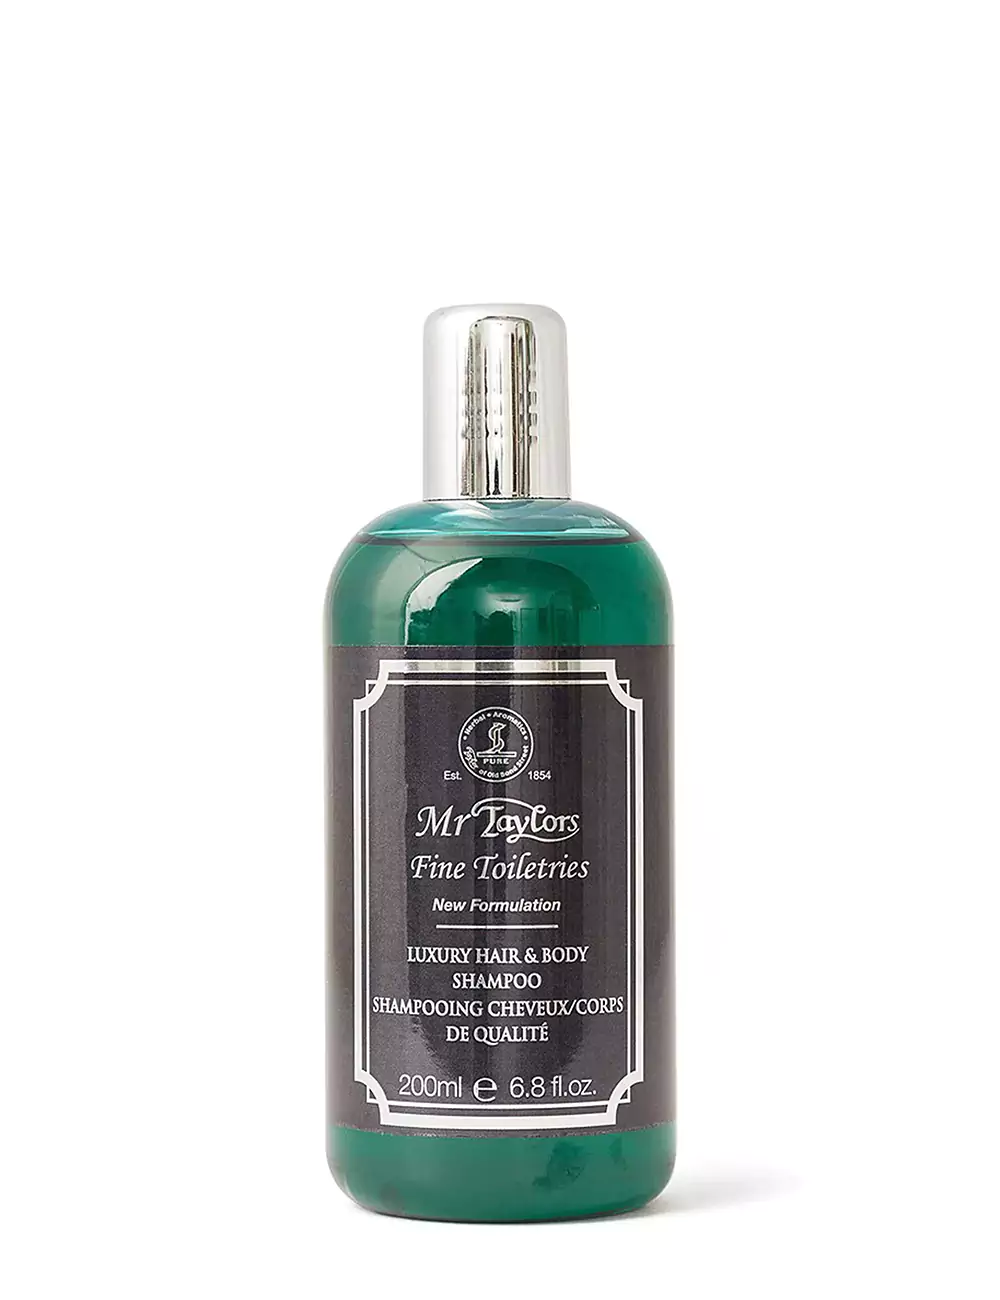 taylor-of-old-bond-street-mr-taylor-hair-and-body-shampoo-200ml